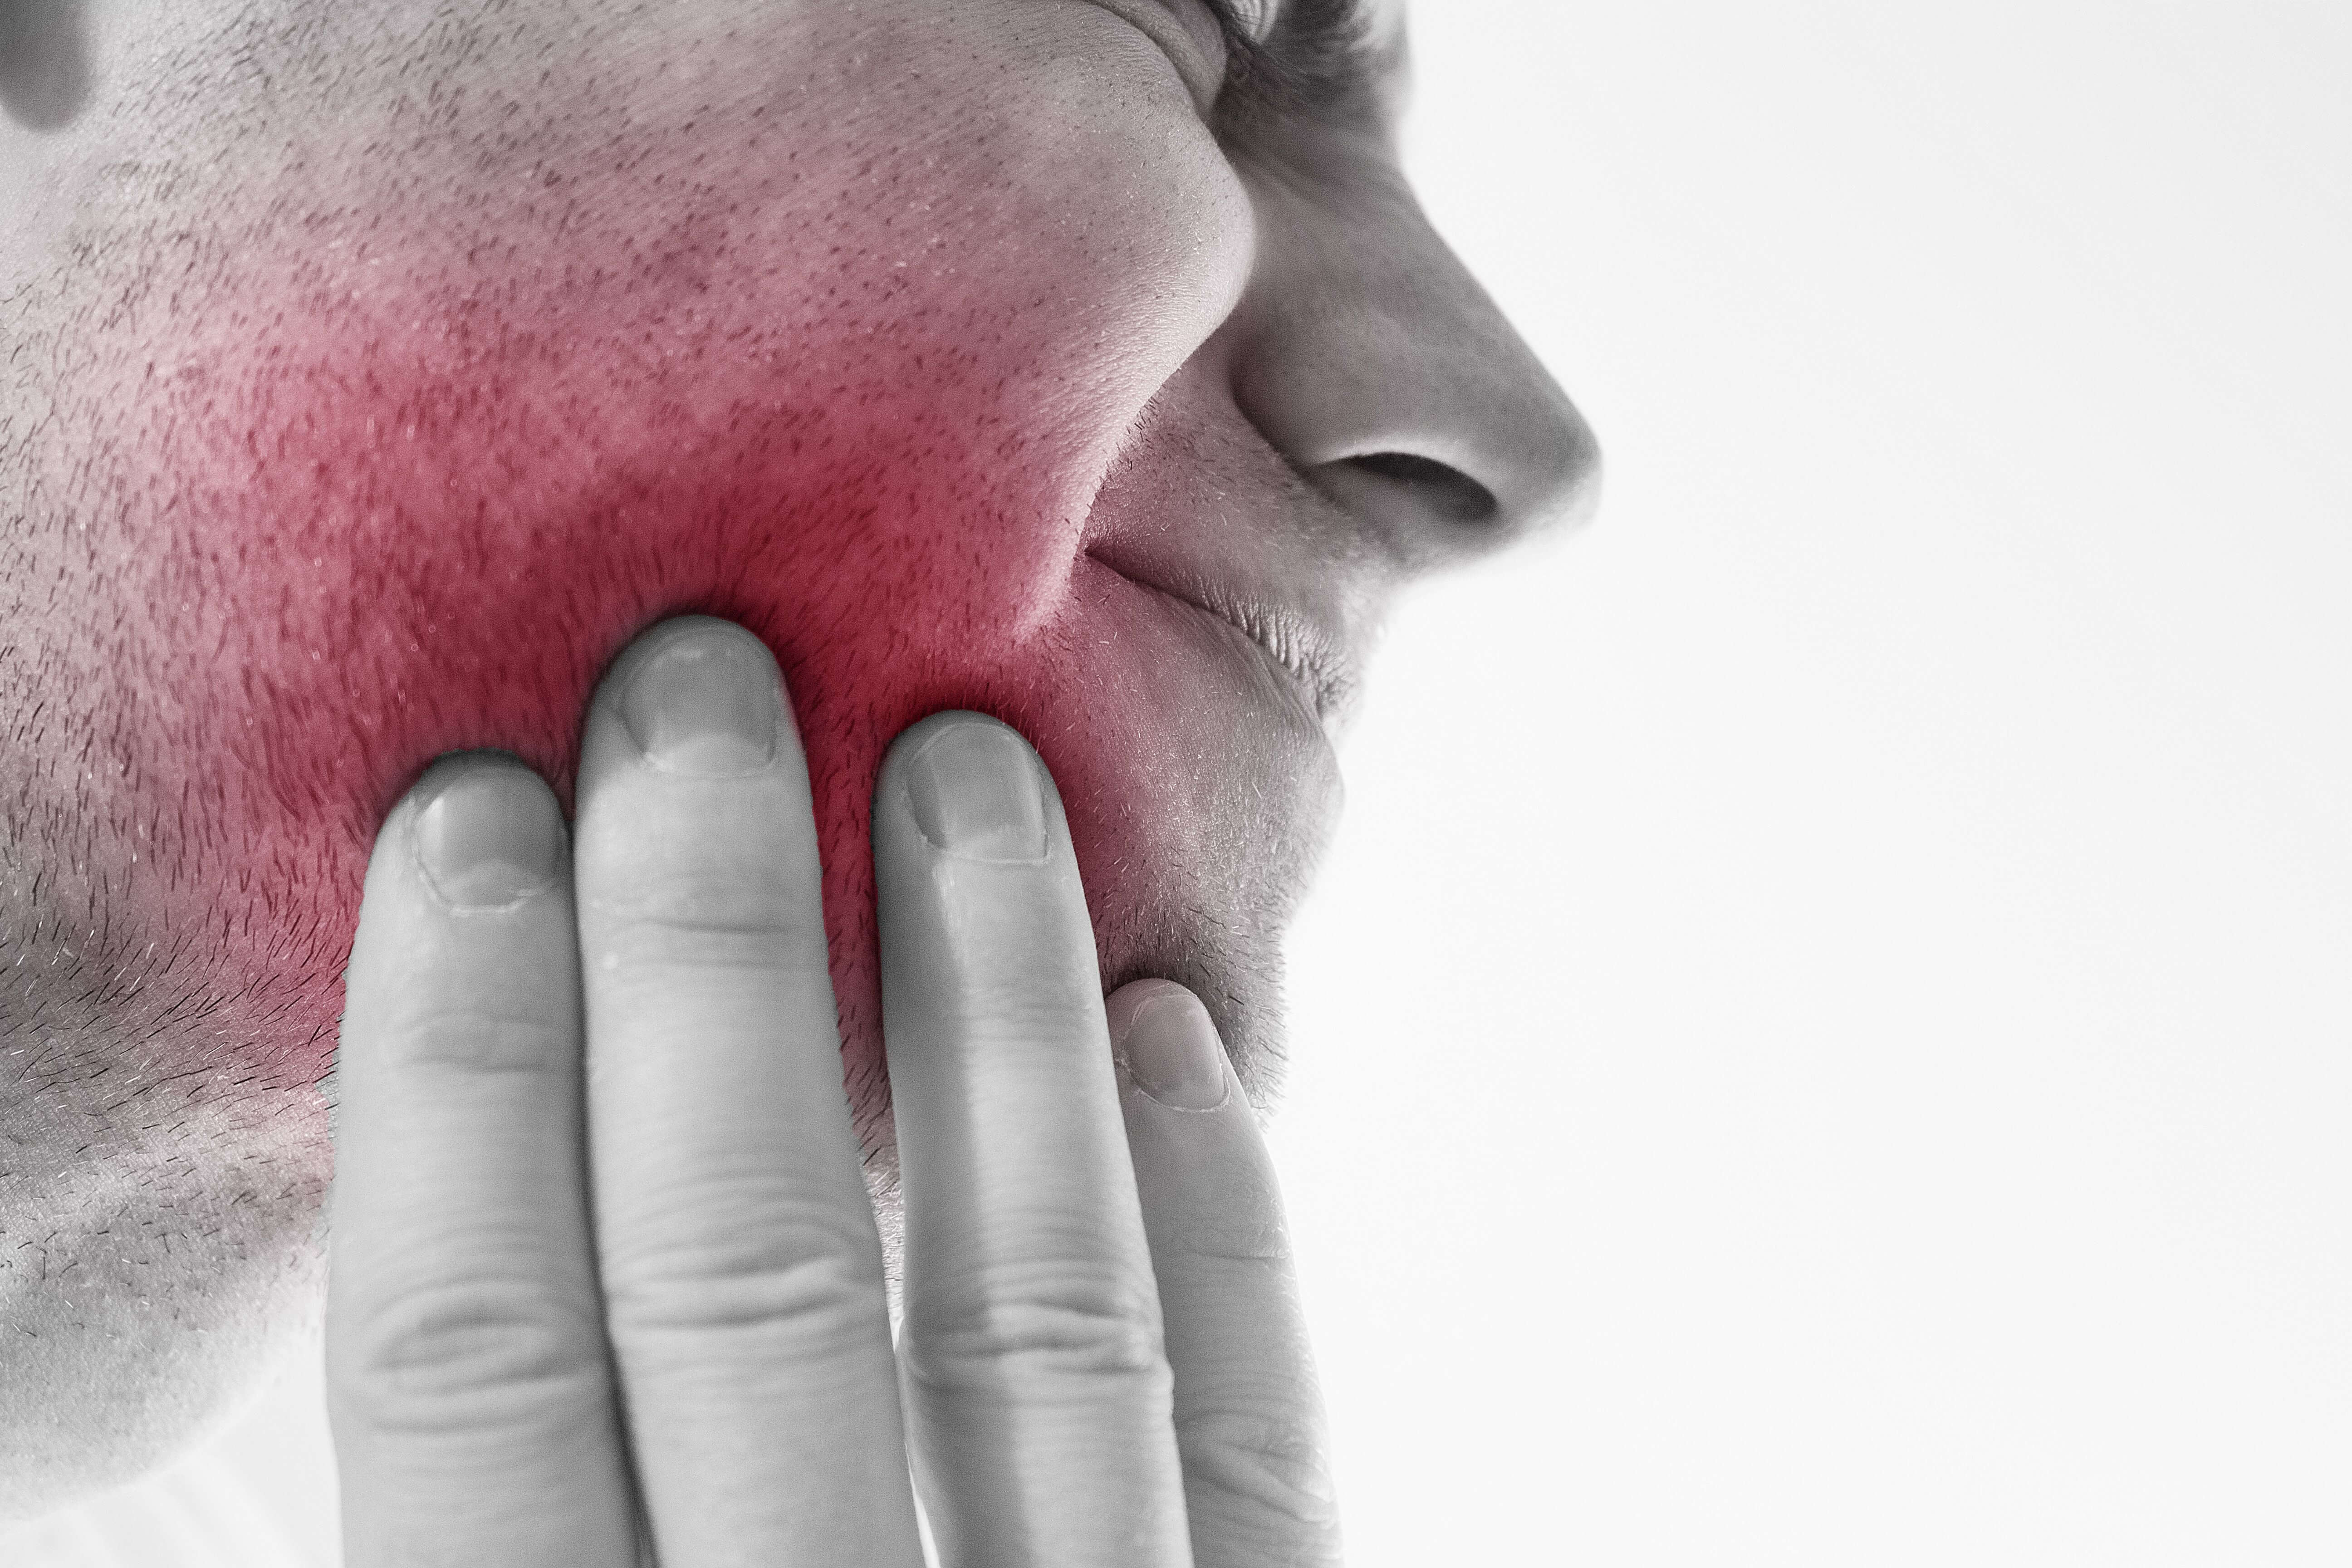 Tooth Pain & Sinuses - A Complete Consumer Guide